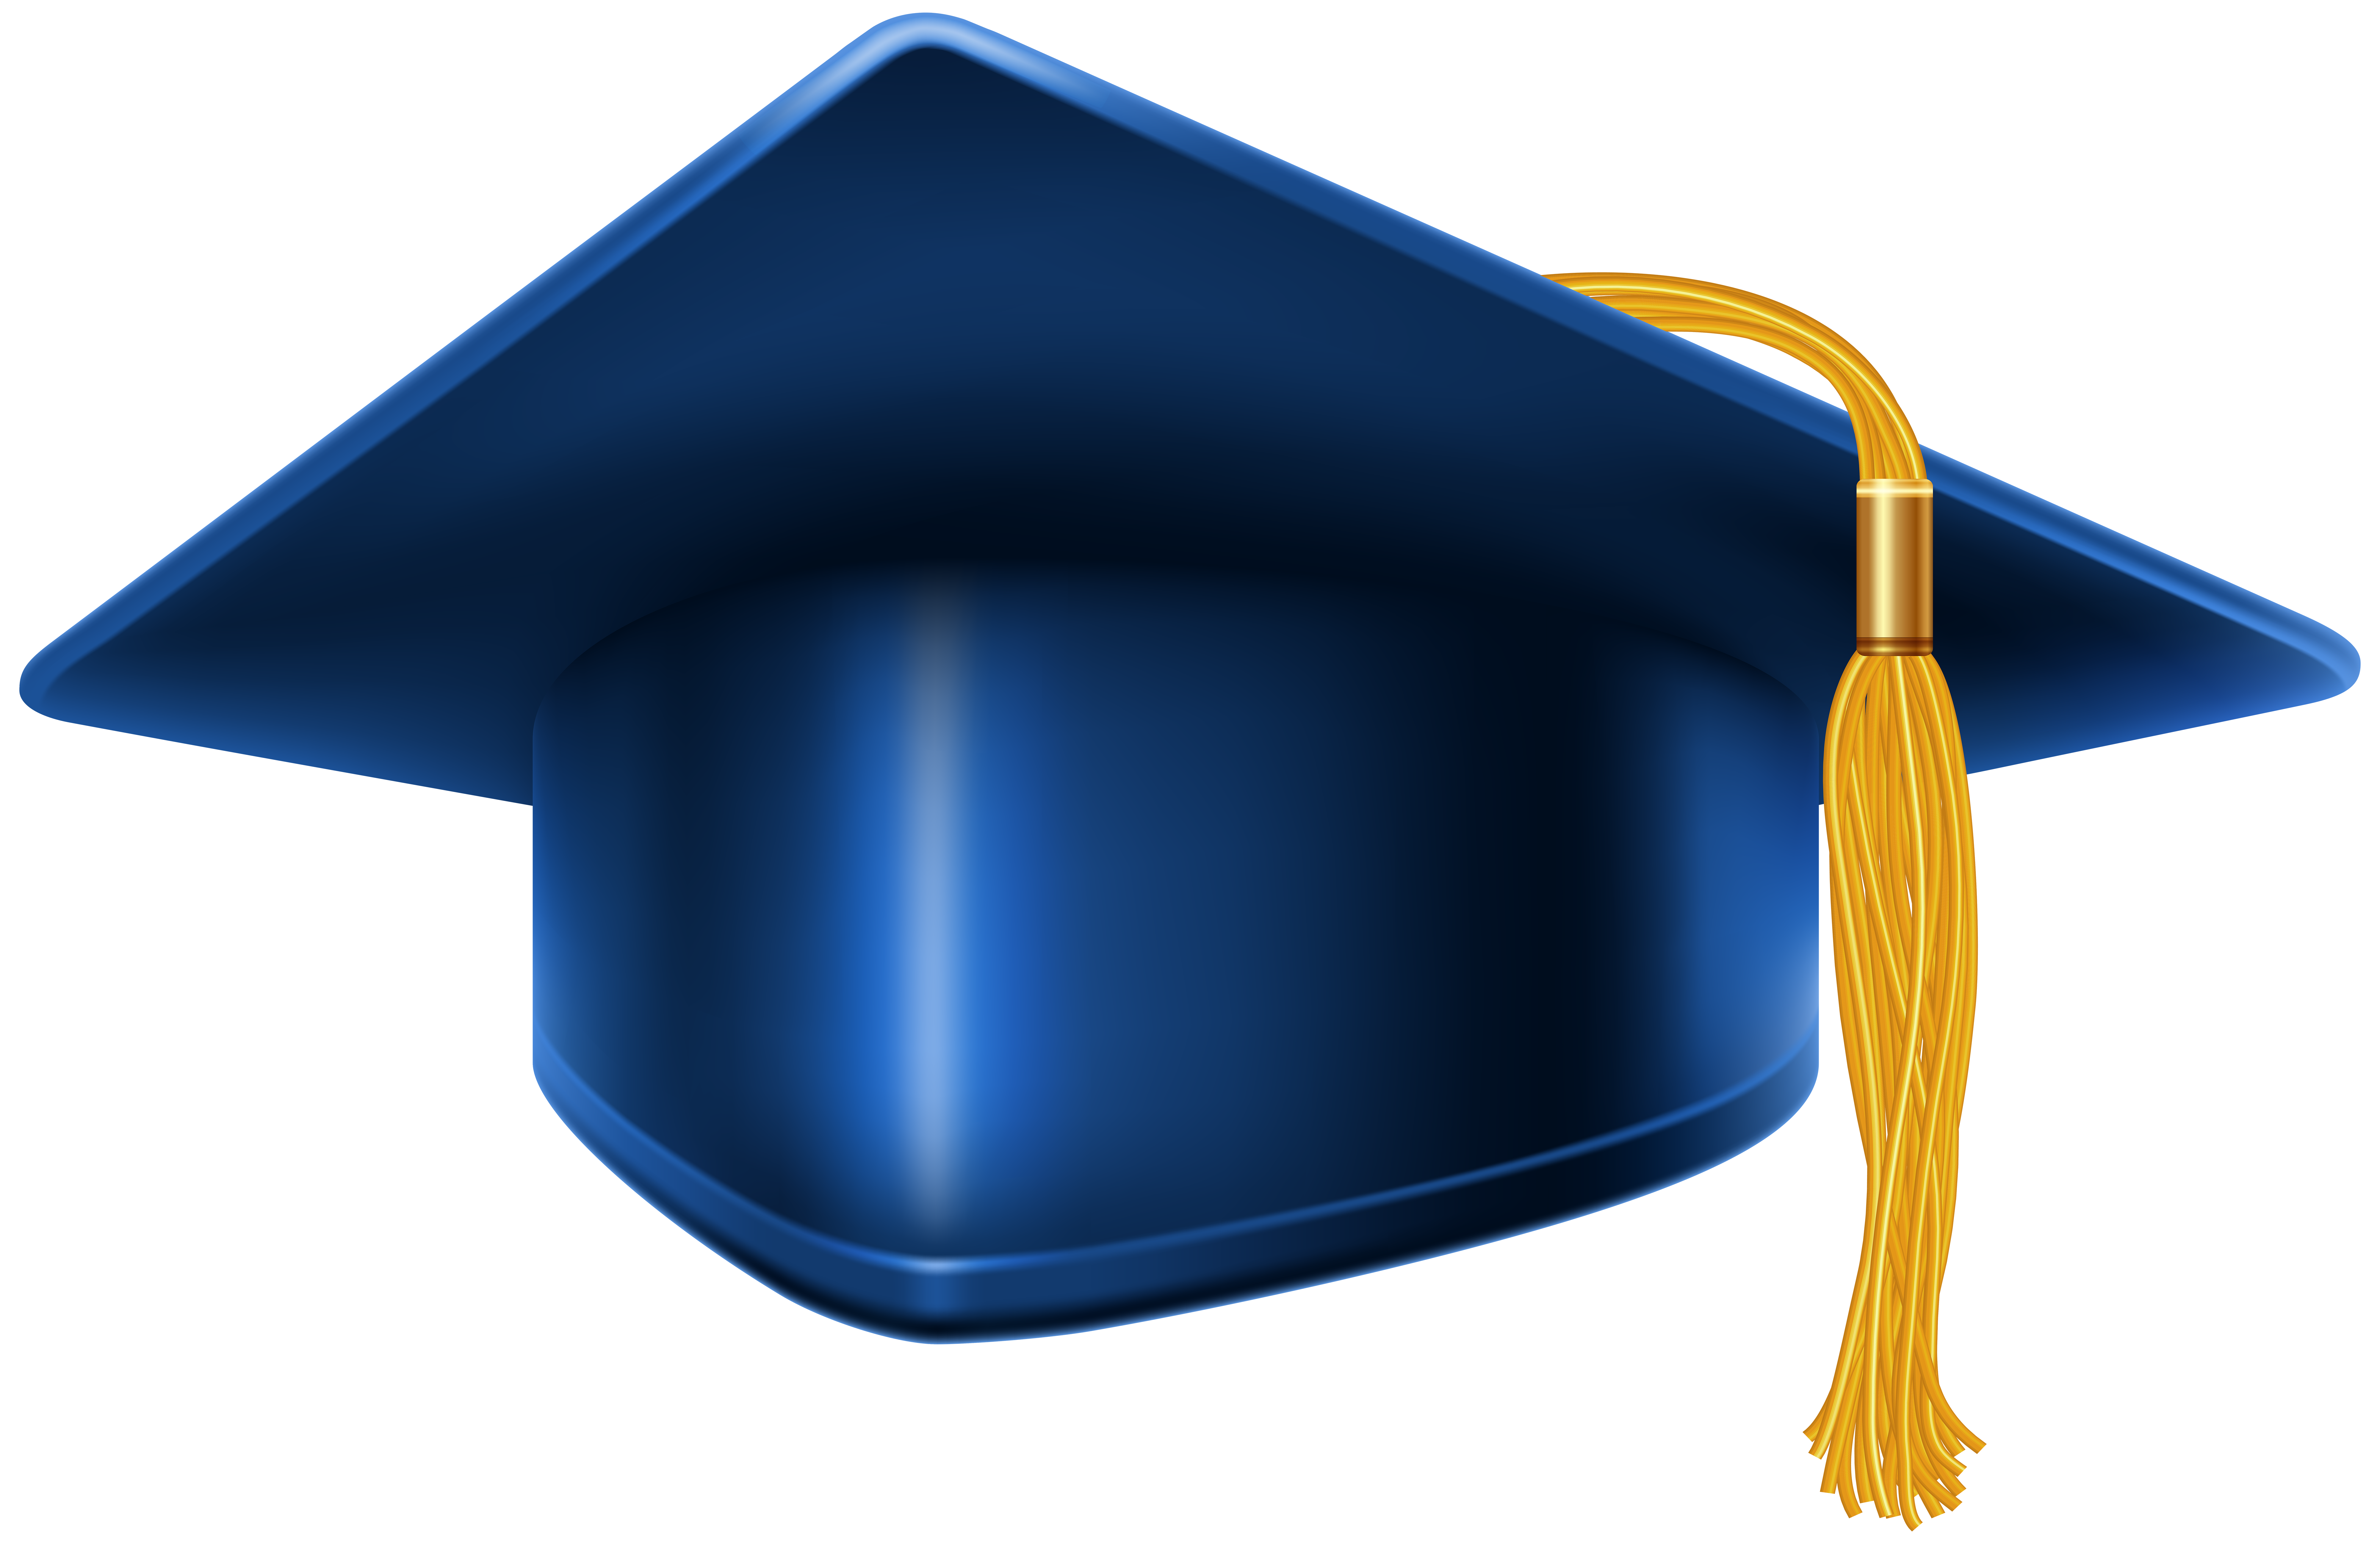 Graduation Cap Vector Free At Collection Of